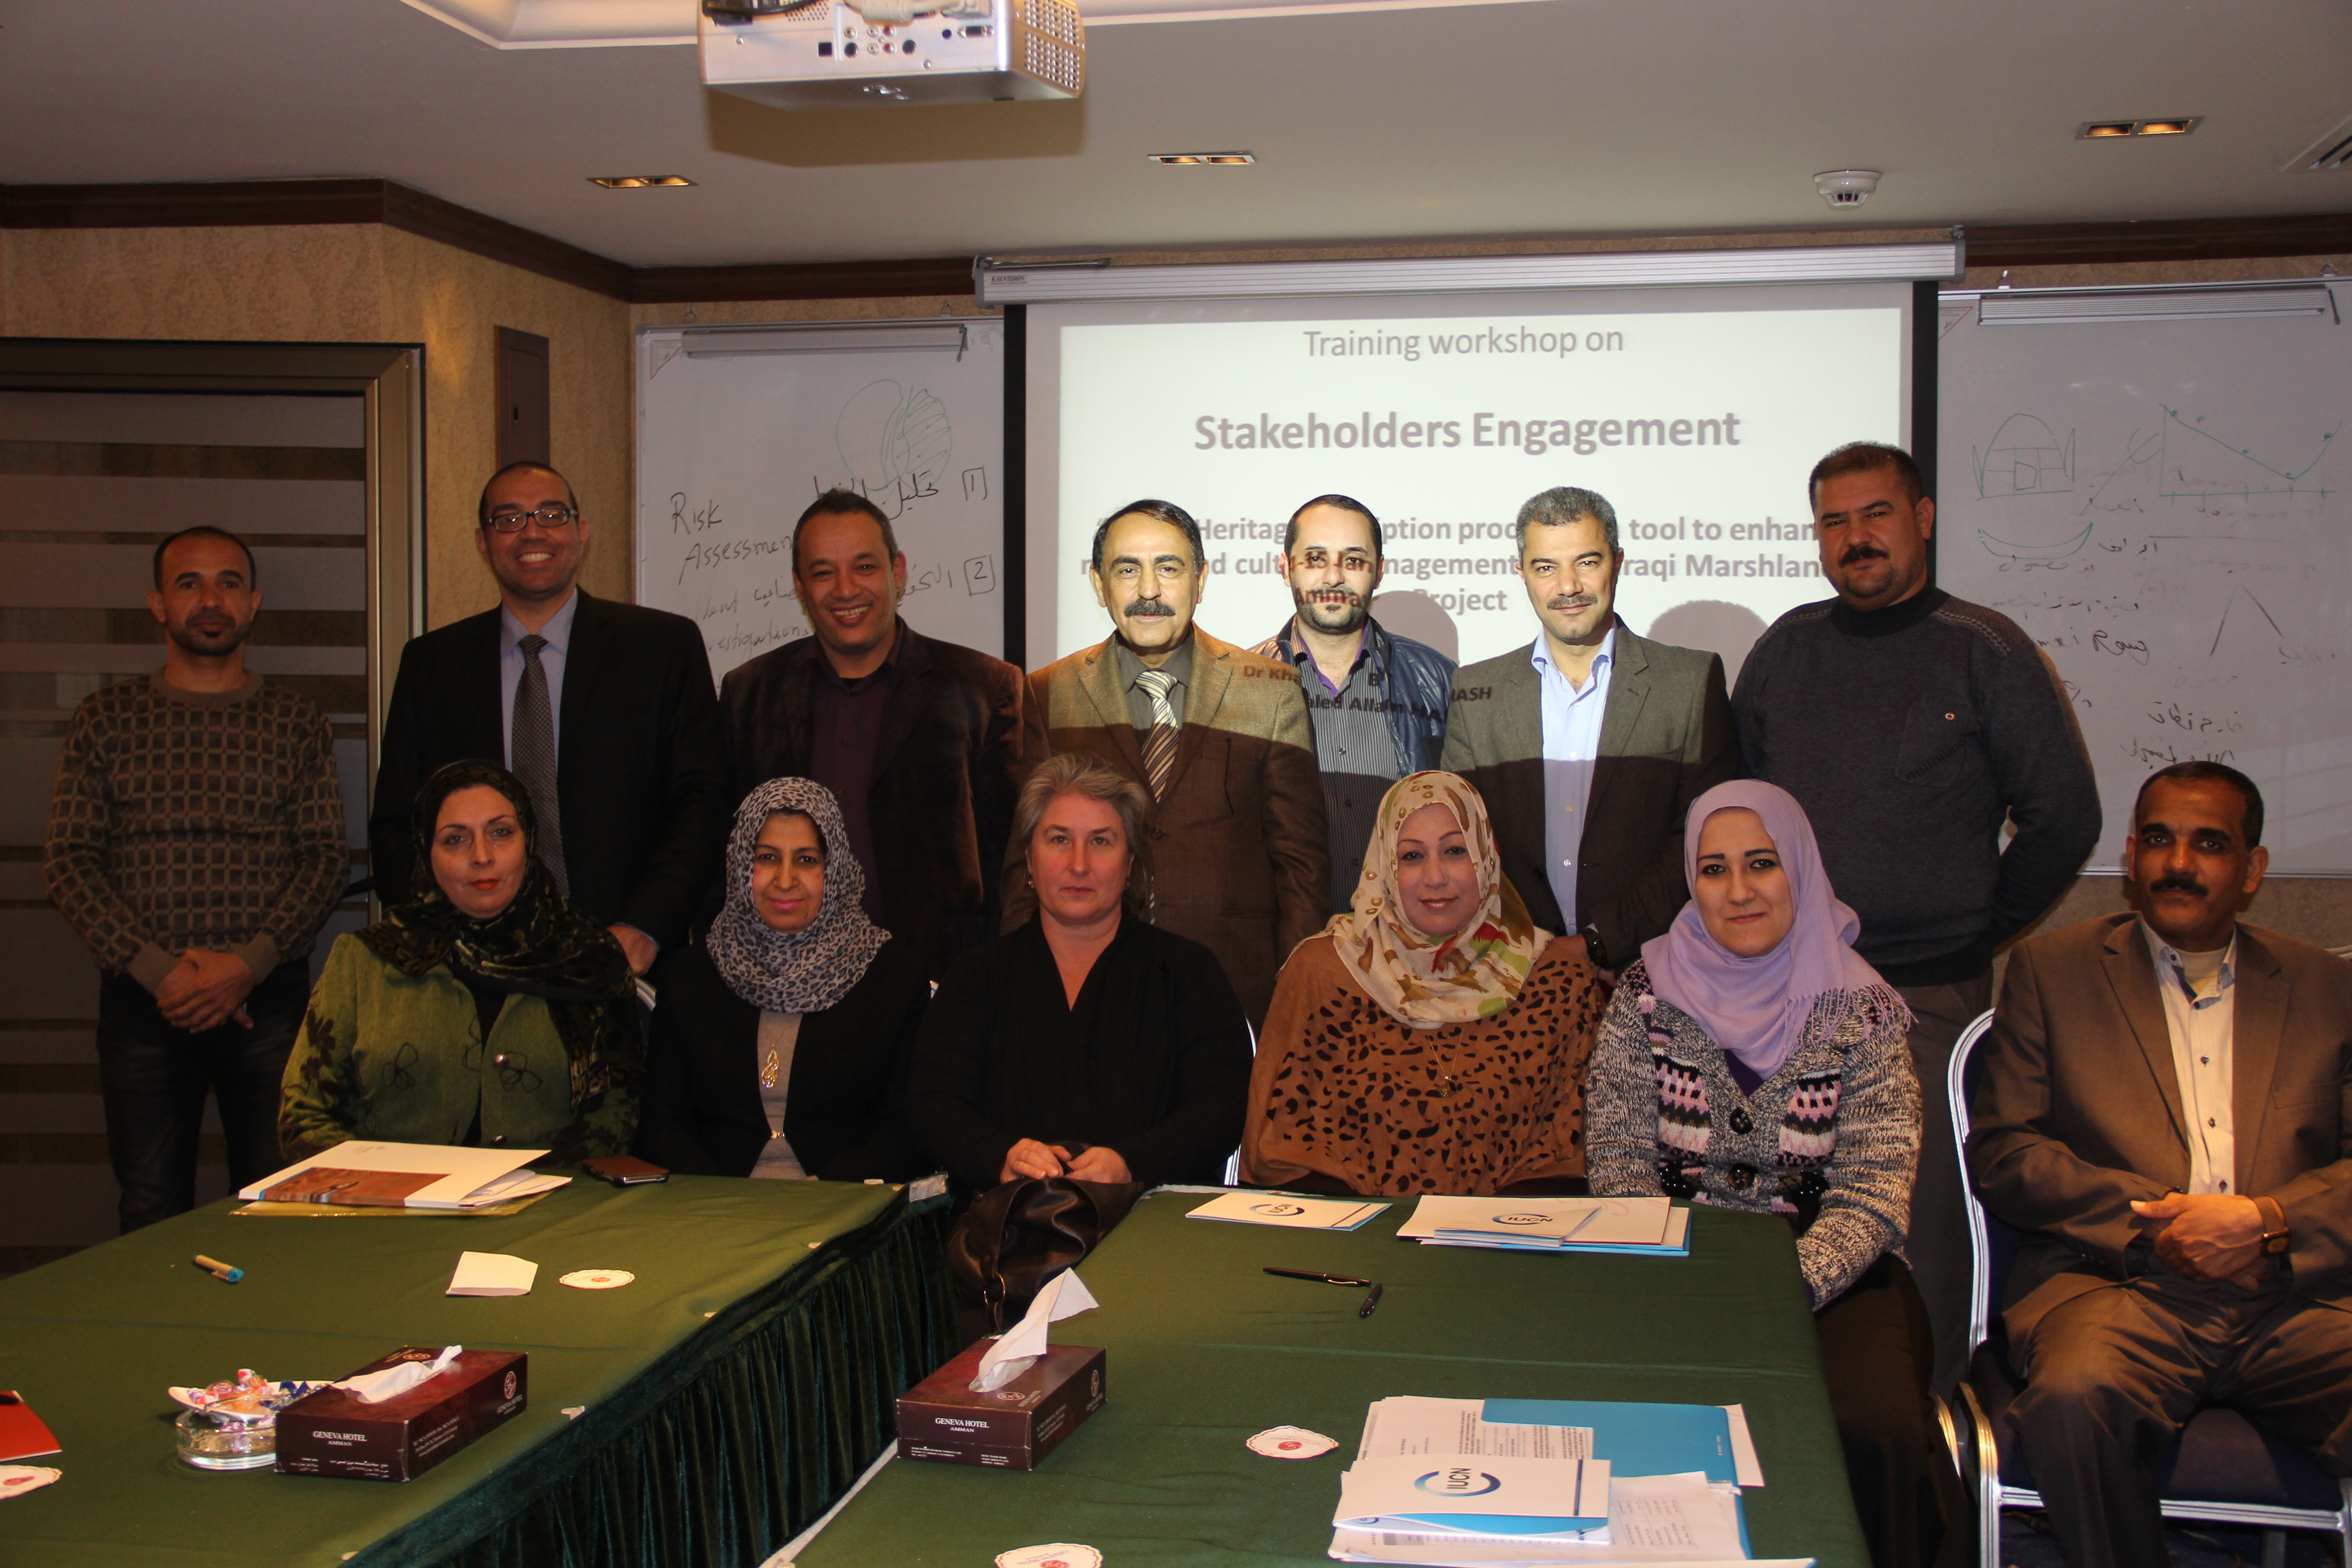 Training on Stakeholders Engagement - Group Photo